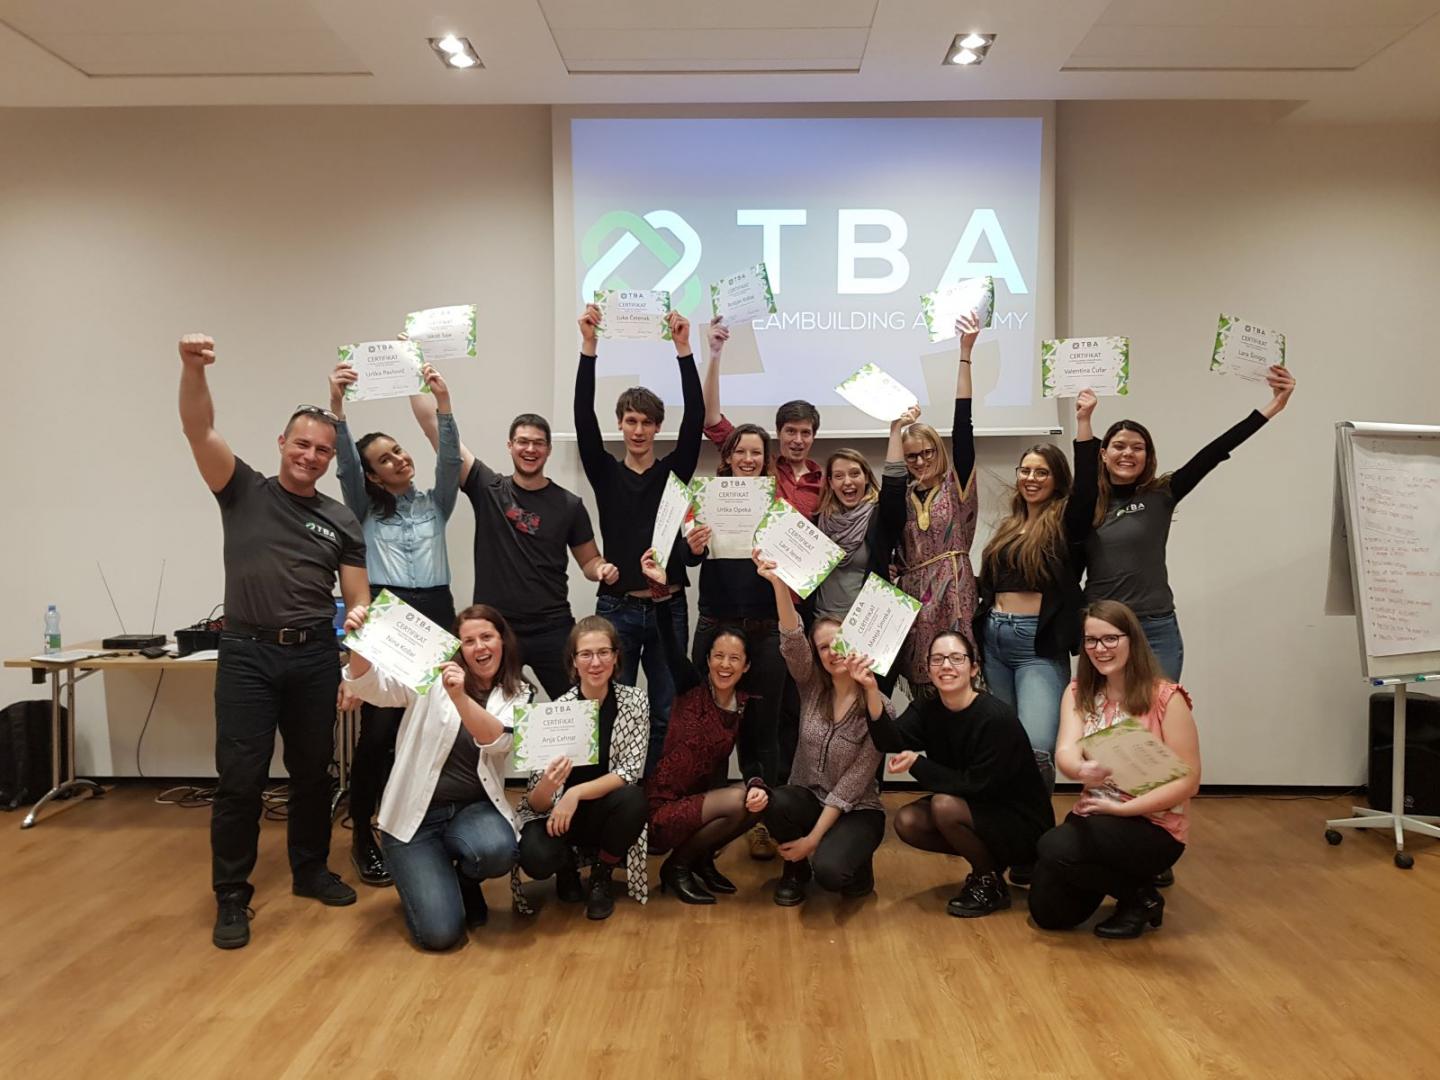 Group photo of new TBA trainers after completing Train the Trainer workshop